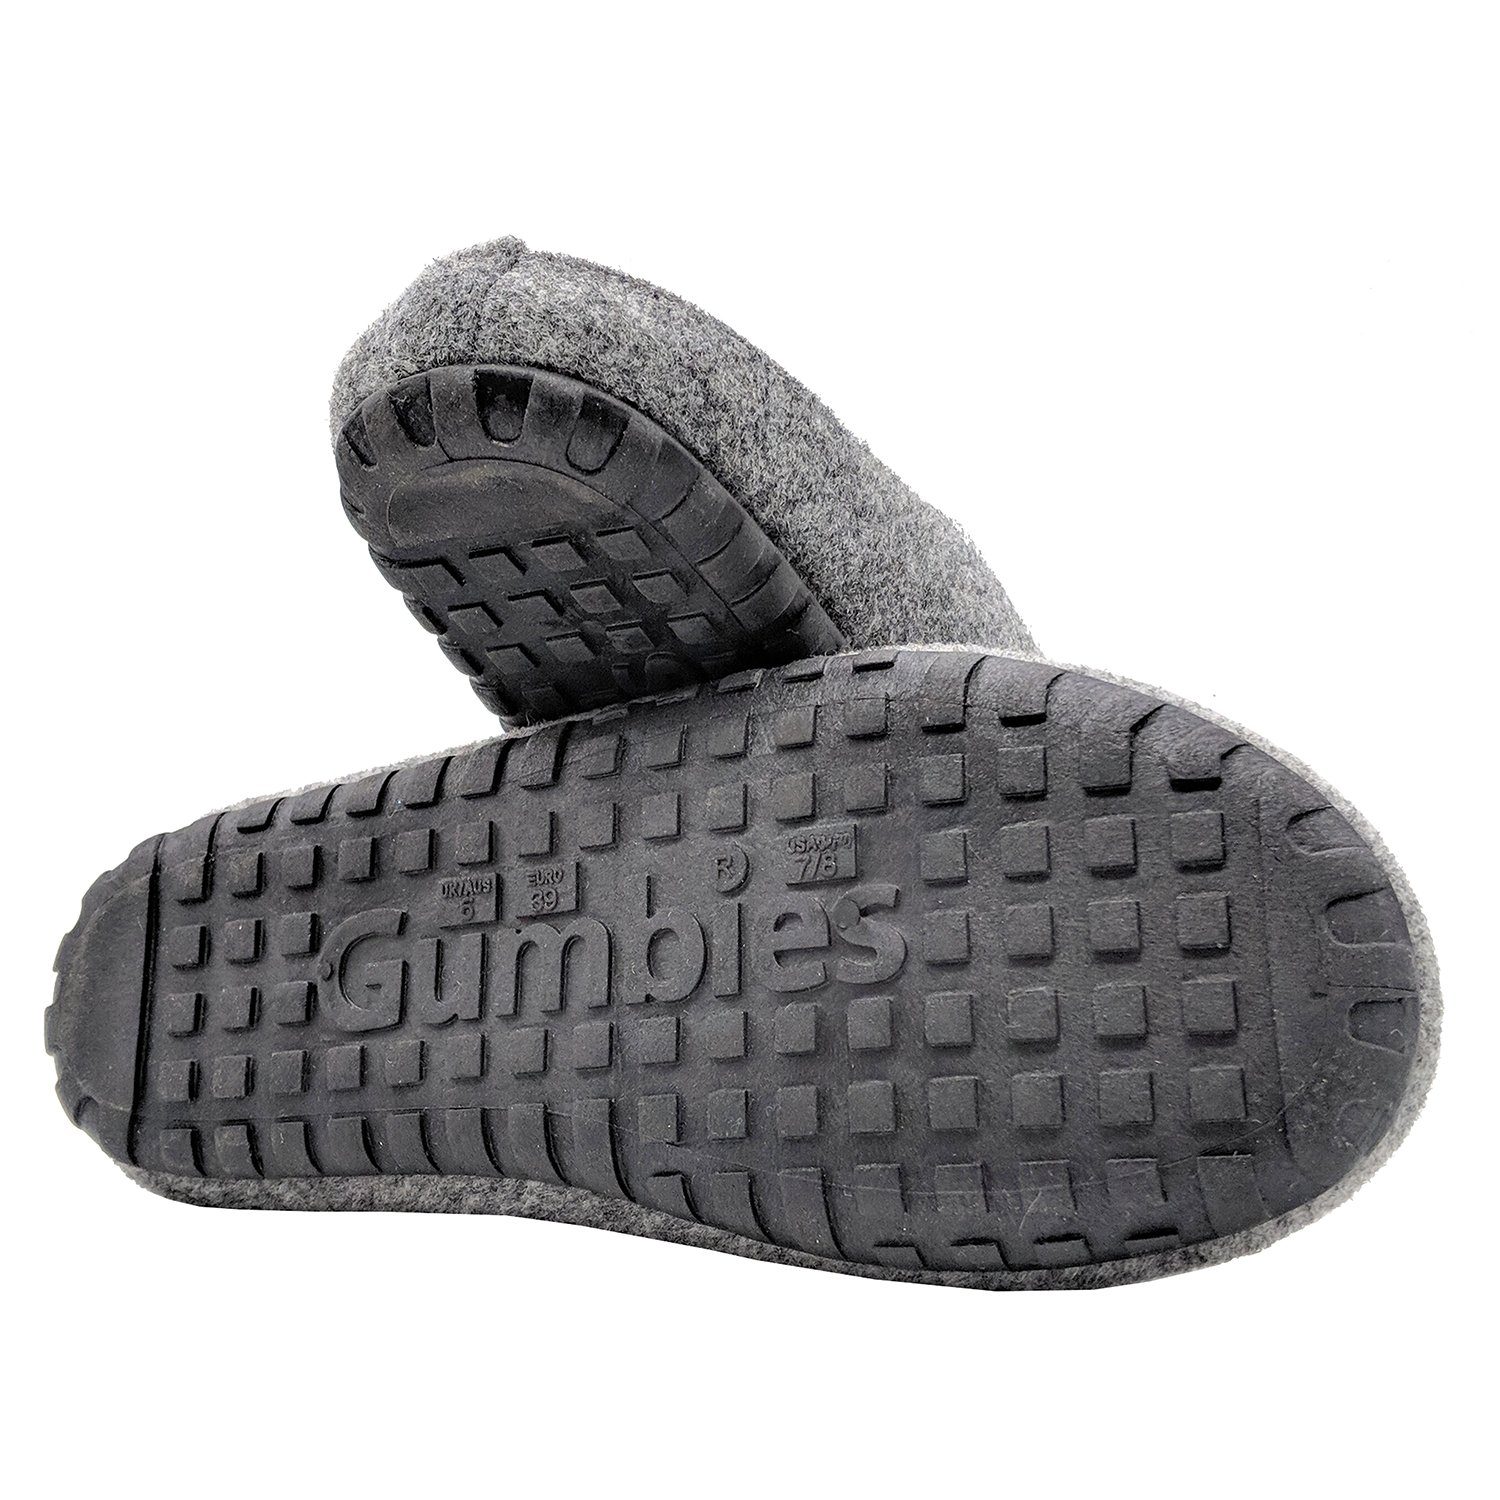 Gumbies Outback Slipper in Grey-Curry Hausschuh Designs« farbenfrohen Materialien aus »in recycelten